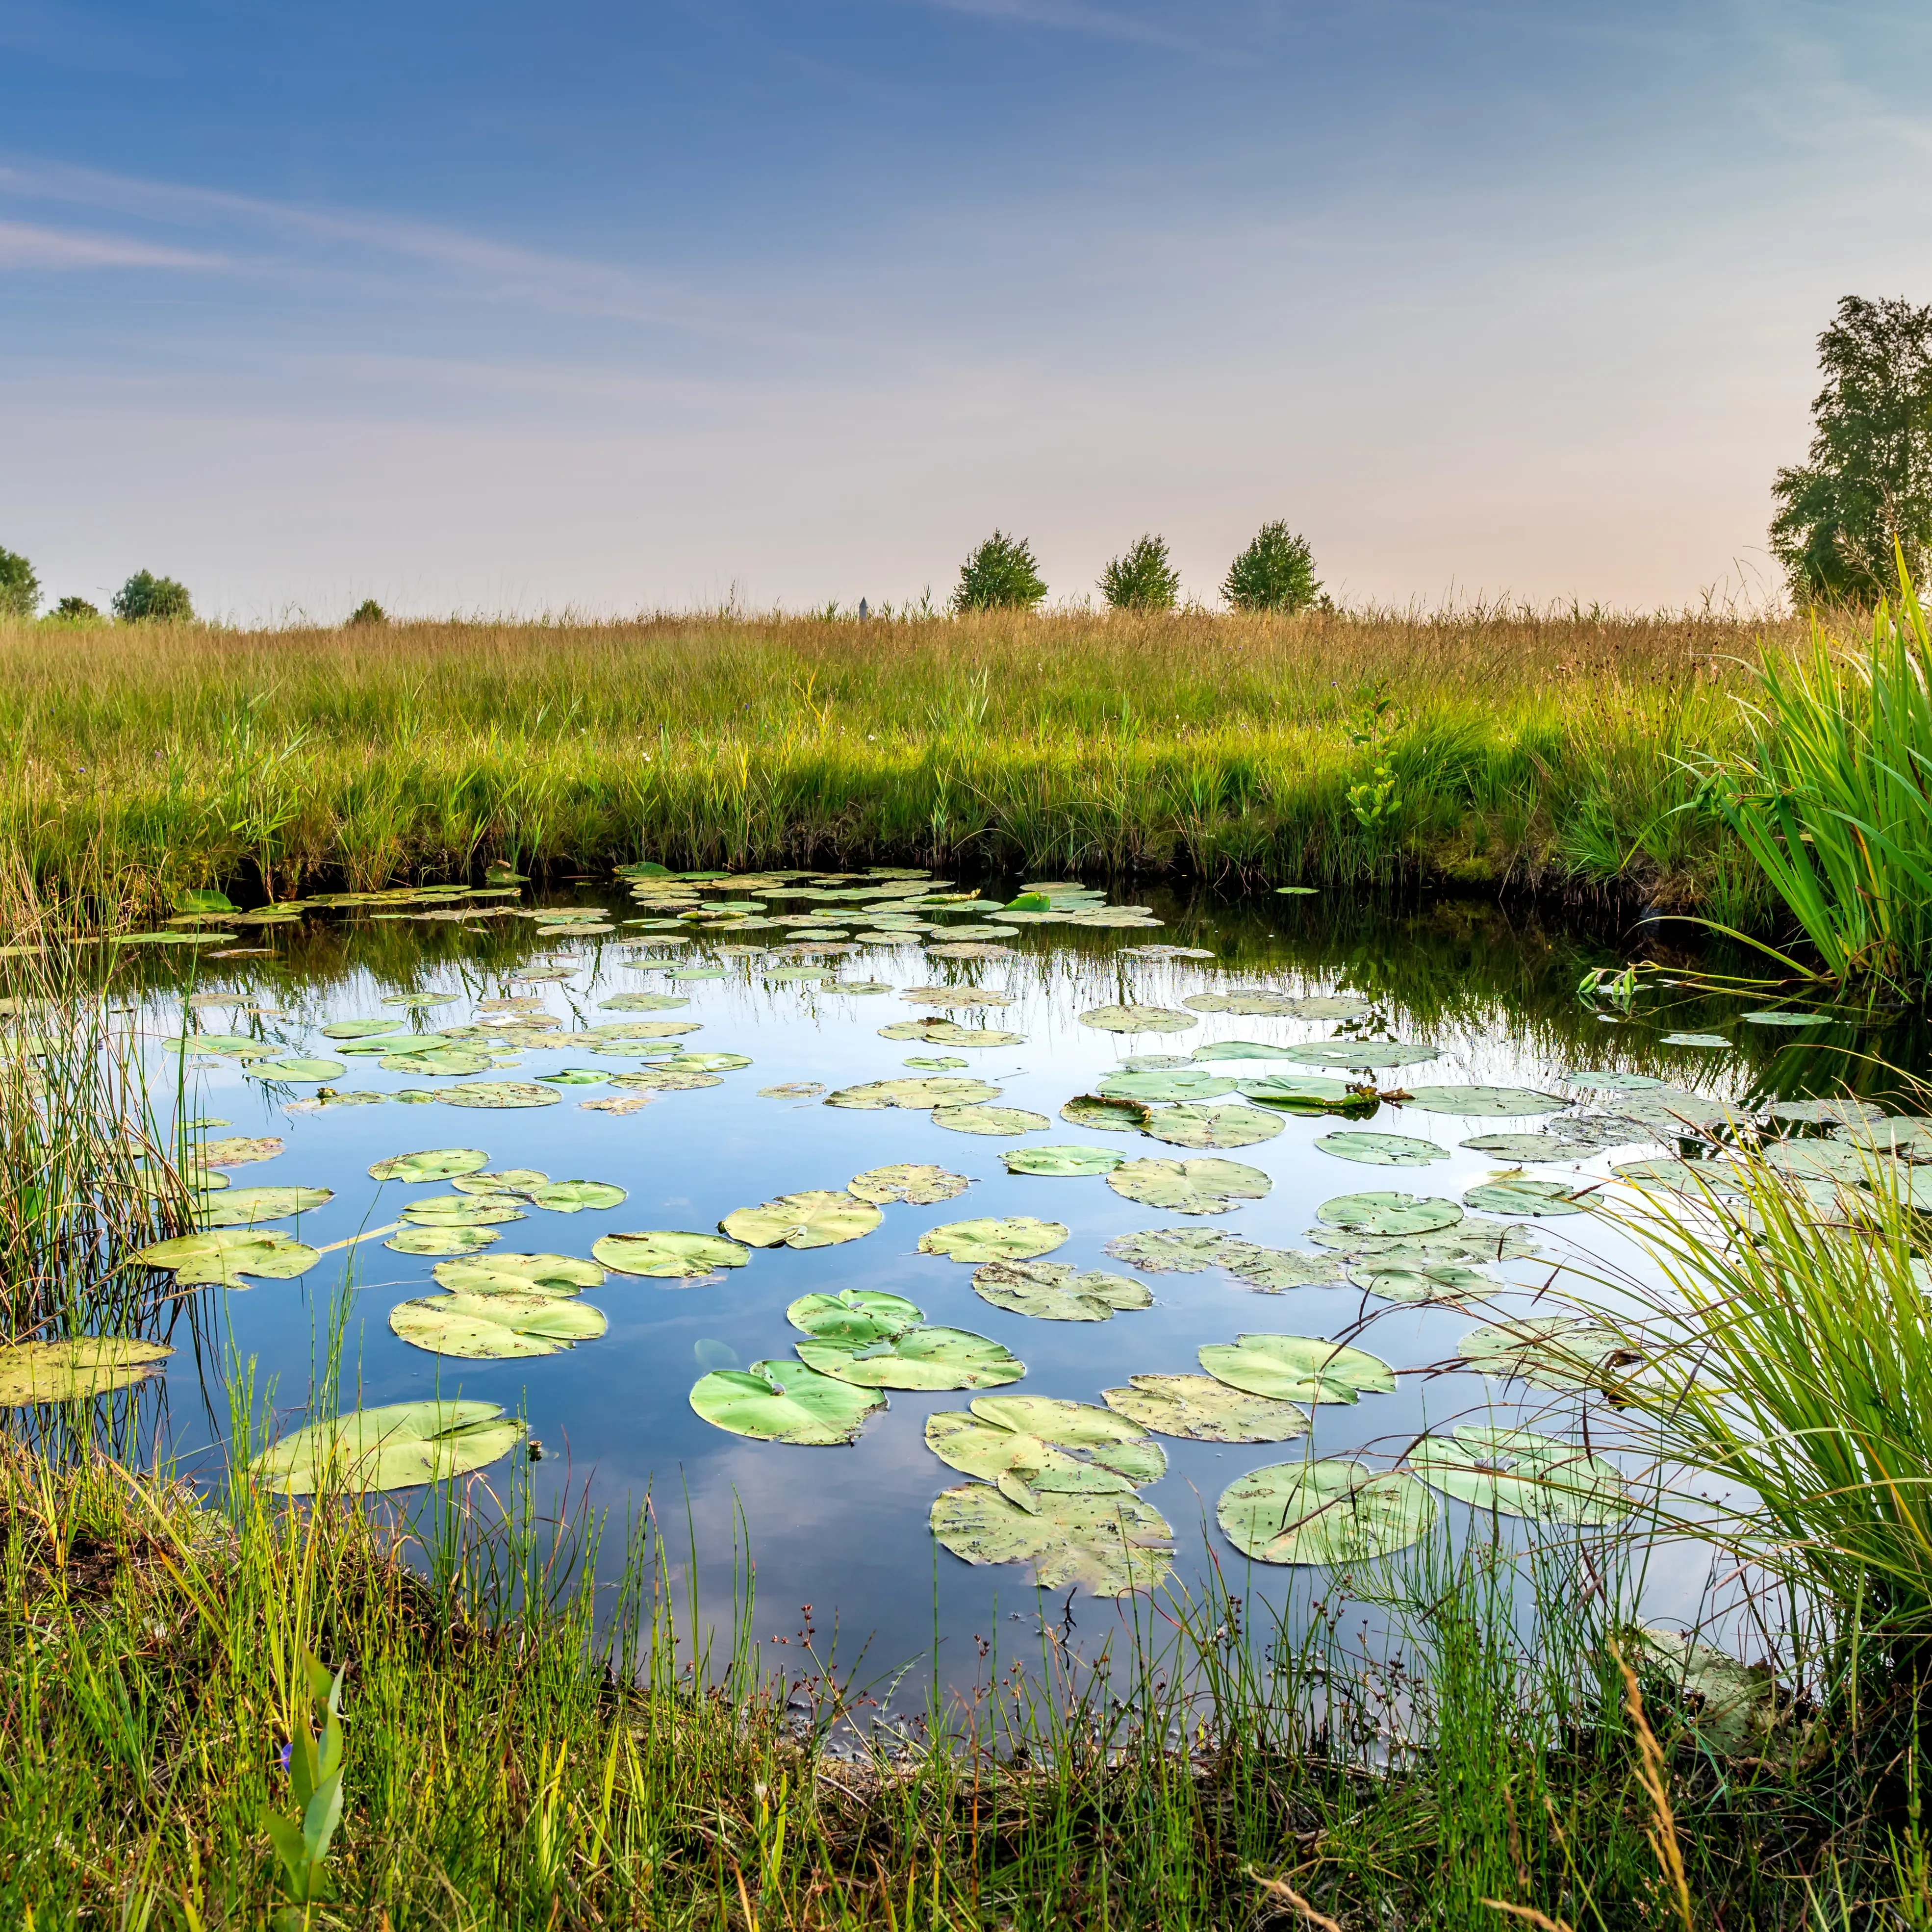 A wetlands pond with lily-pads surrounded by tall grasses, where Apex provided water resources services.